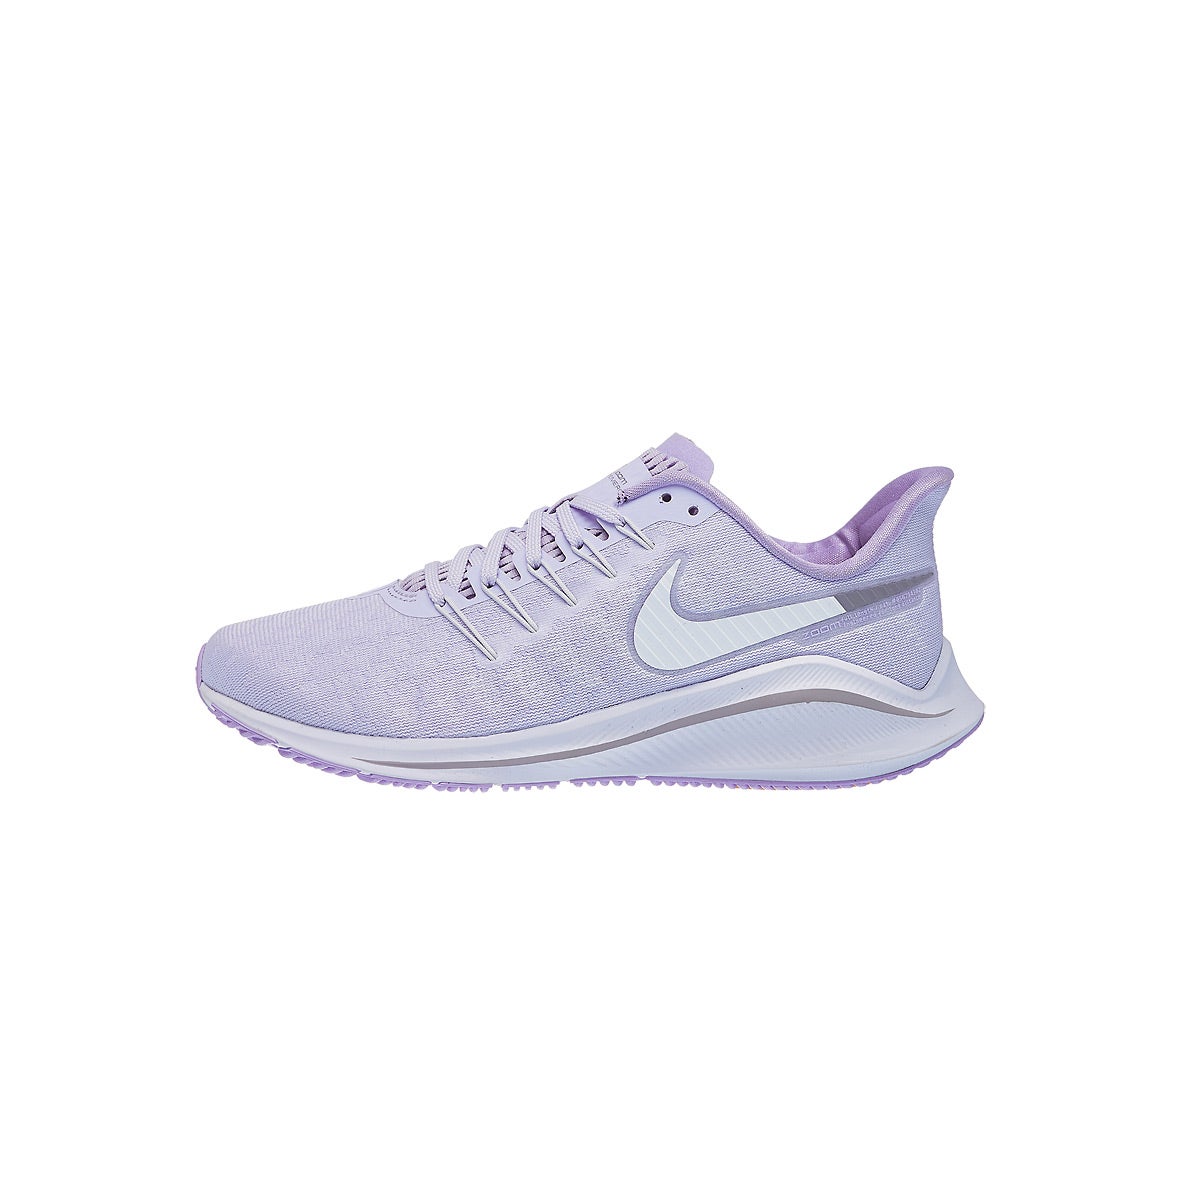 Nike Zoom Vomero 14 Women's Shoes Amethyst Tint/Whit 360° View ...